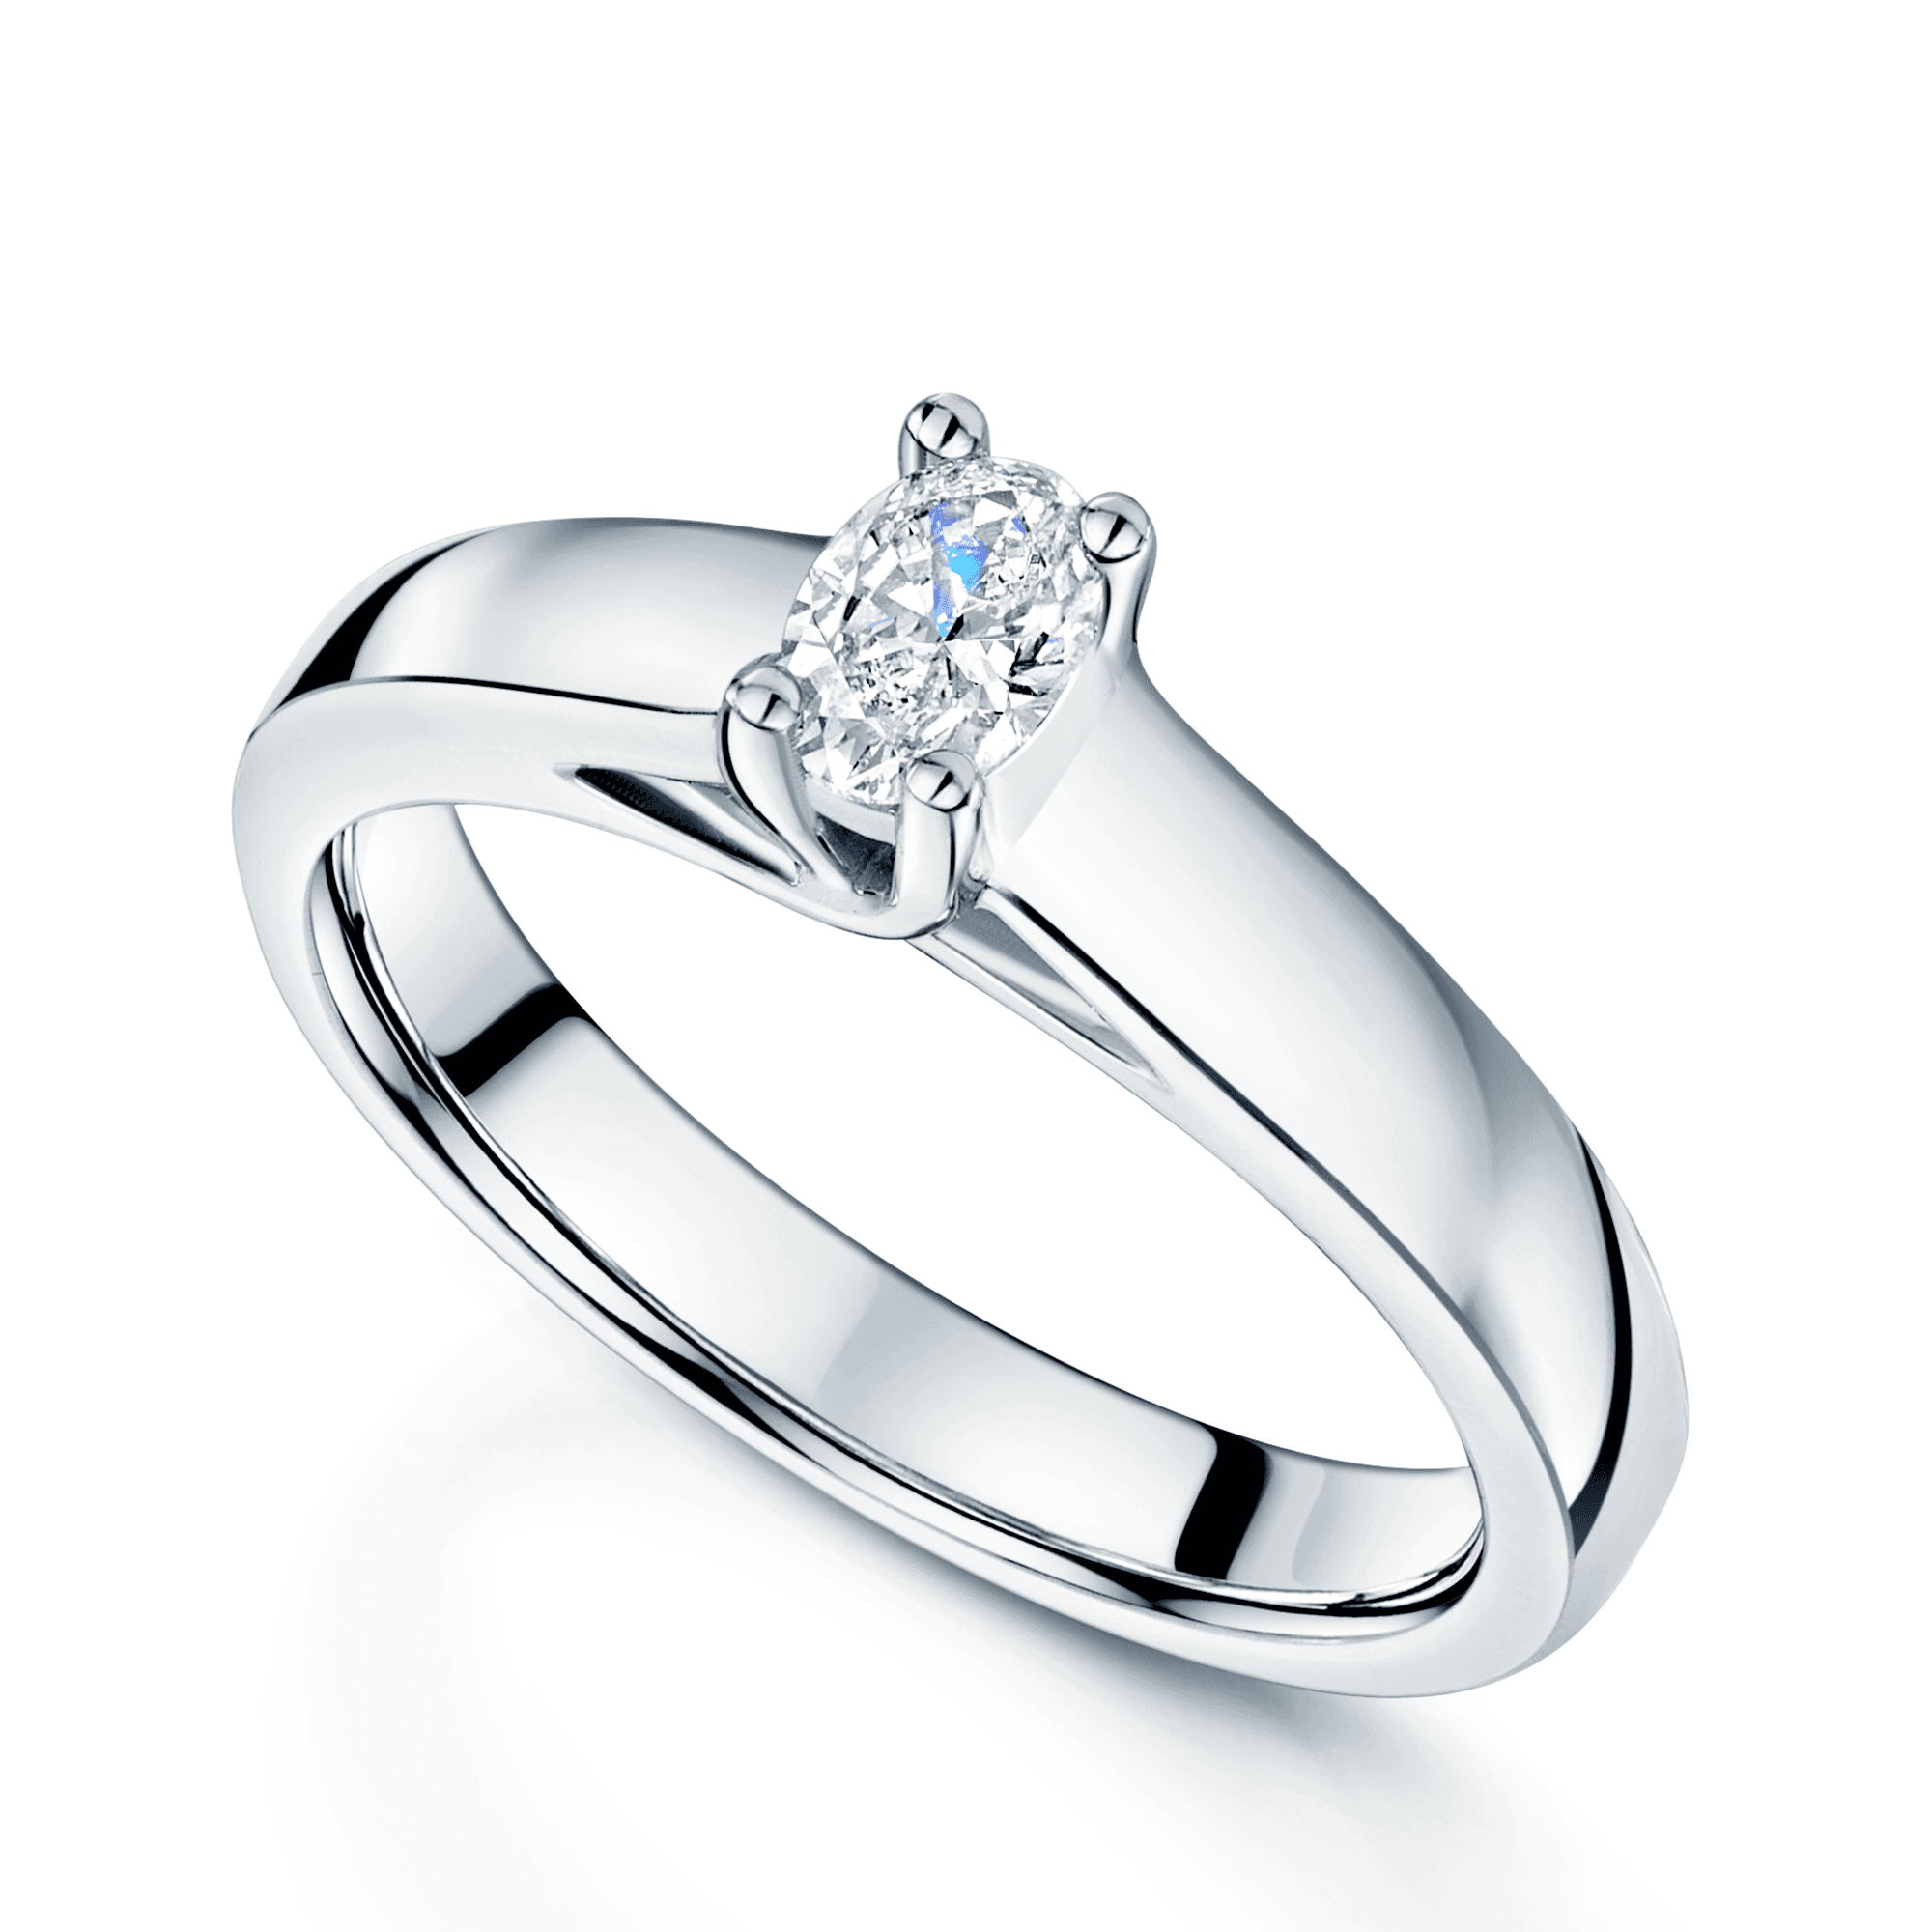 Platinum GIA Certificated Oval Diamond Ring With A Wide Band